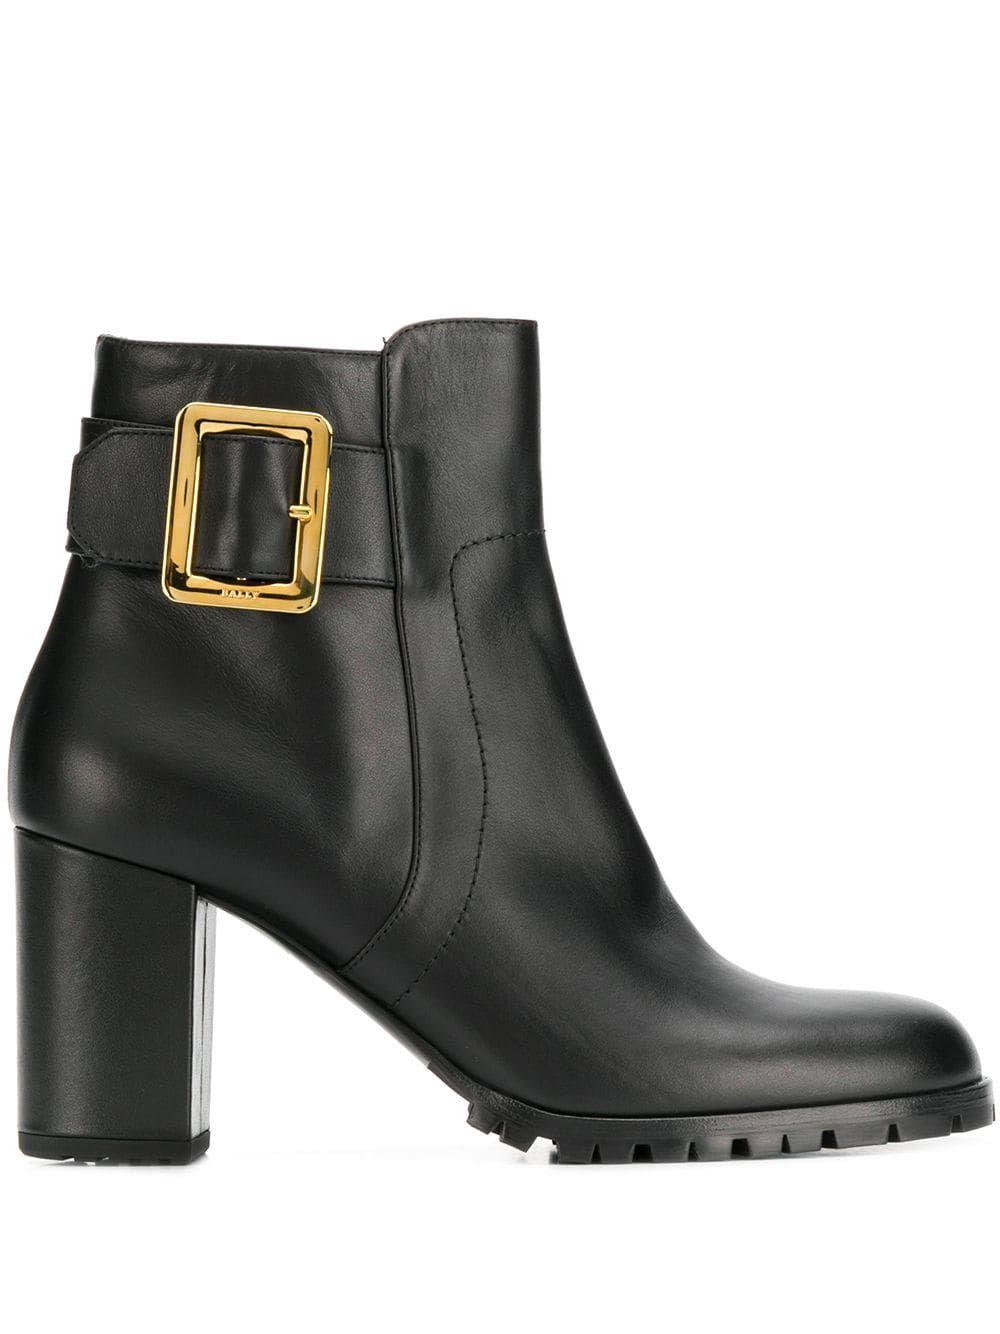 Bally Black Leather Ankle Boots - Lyst